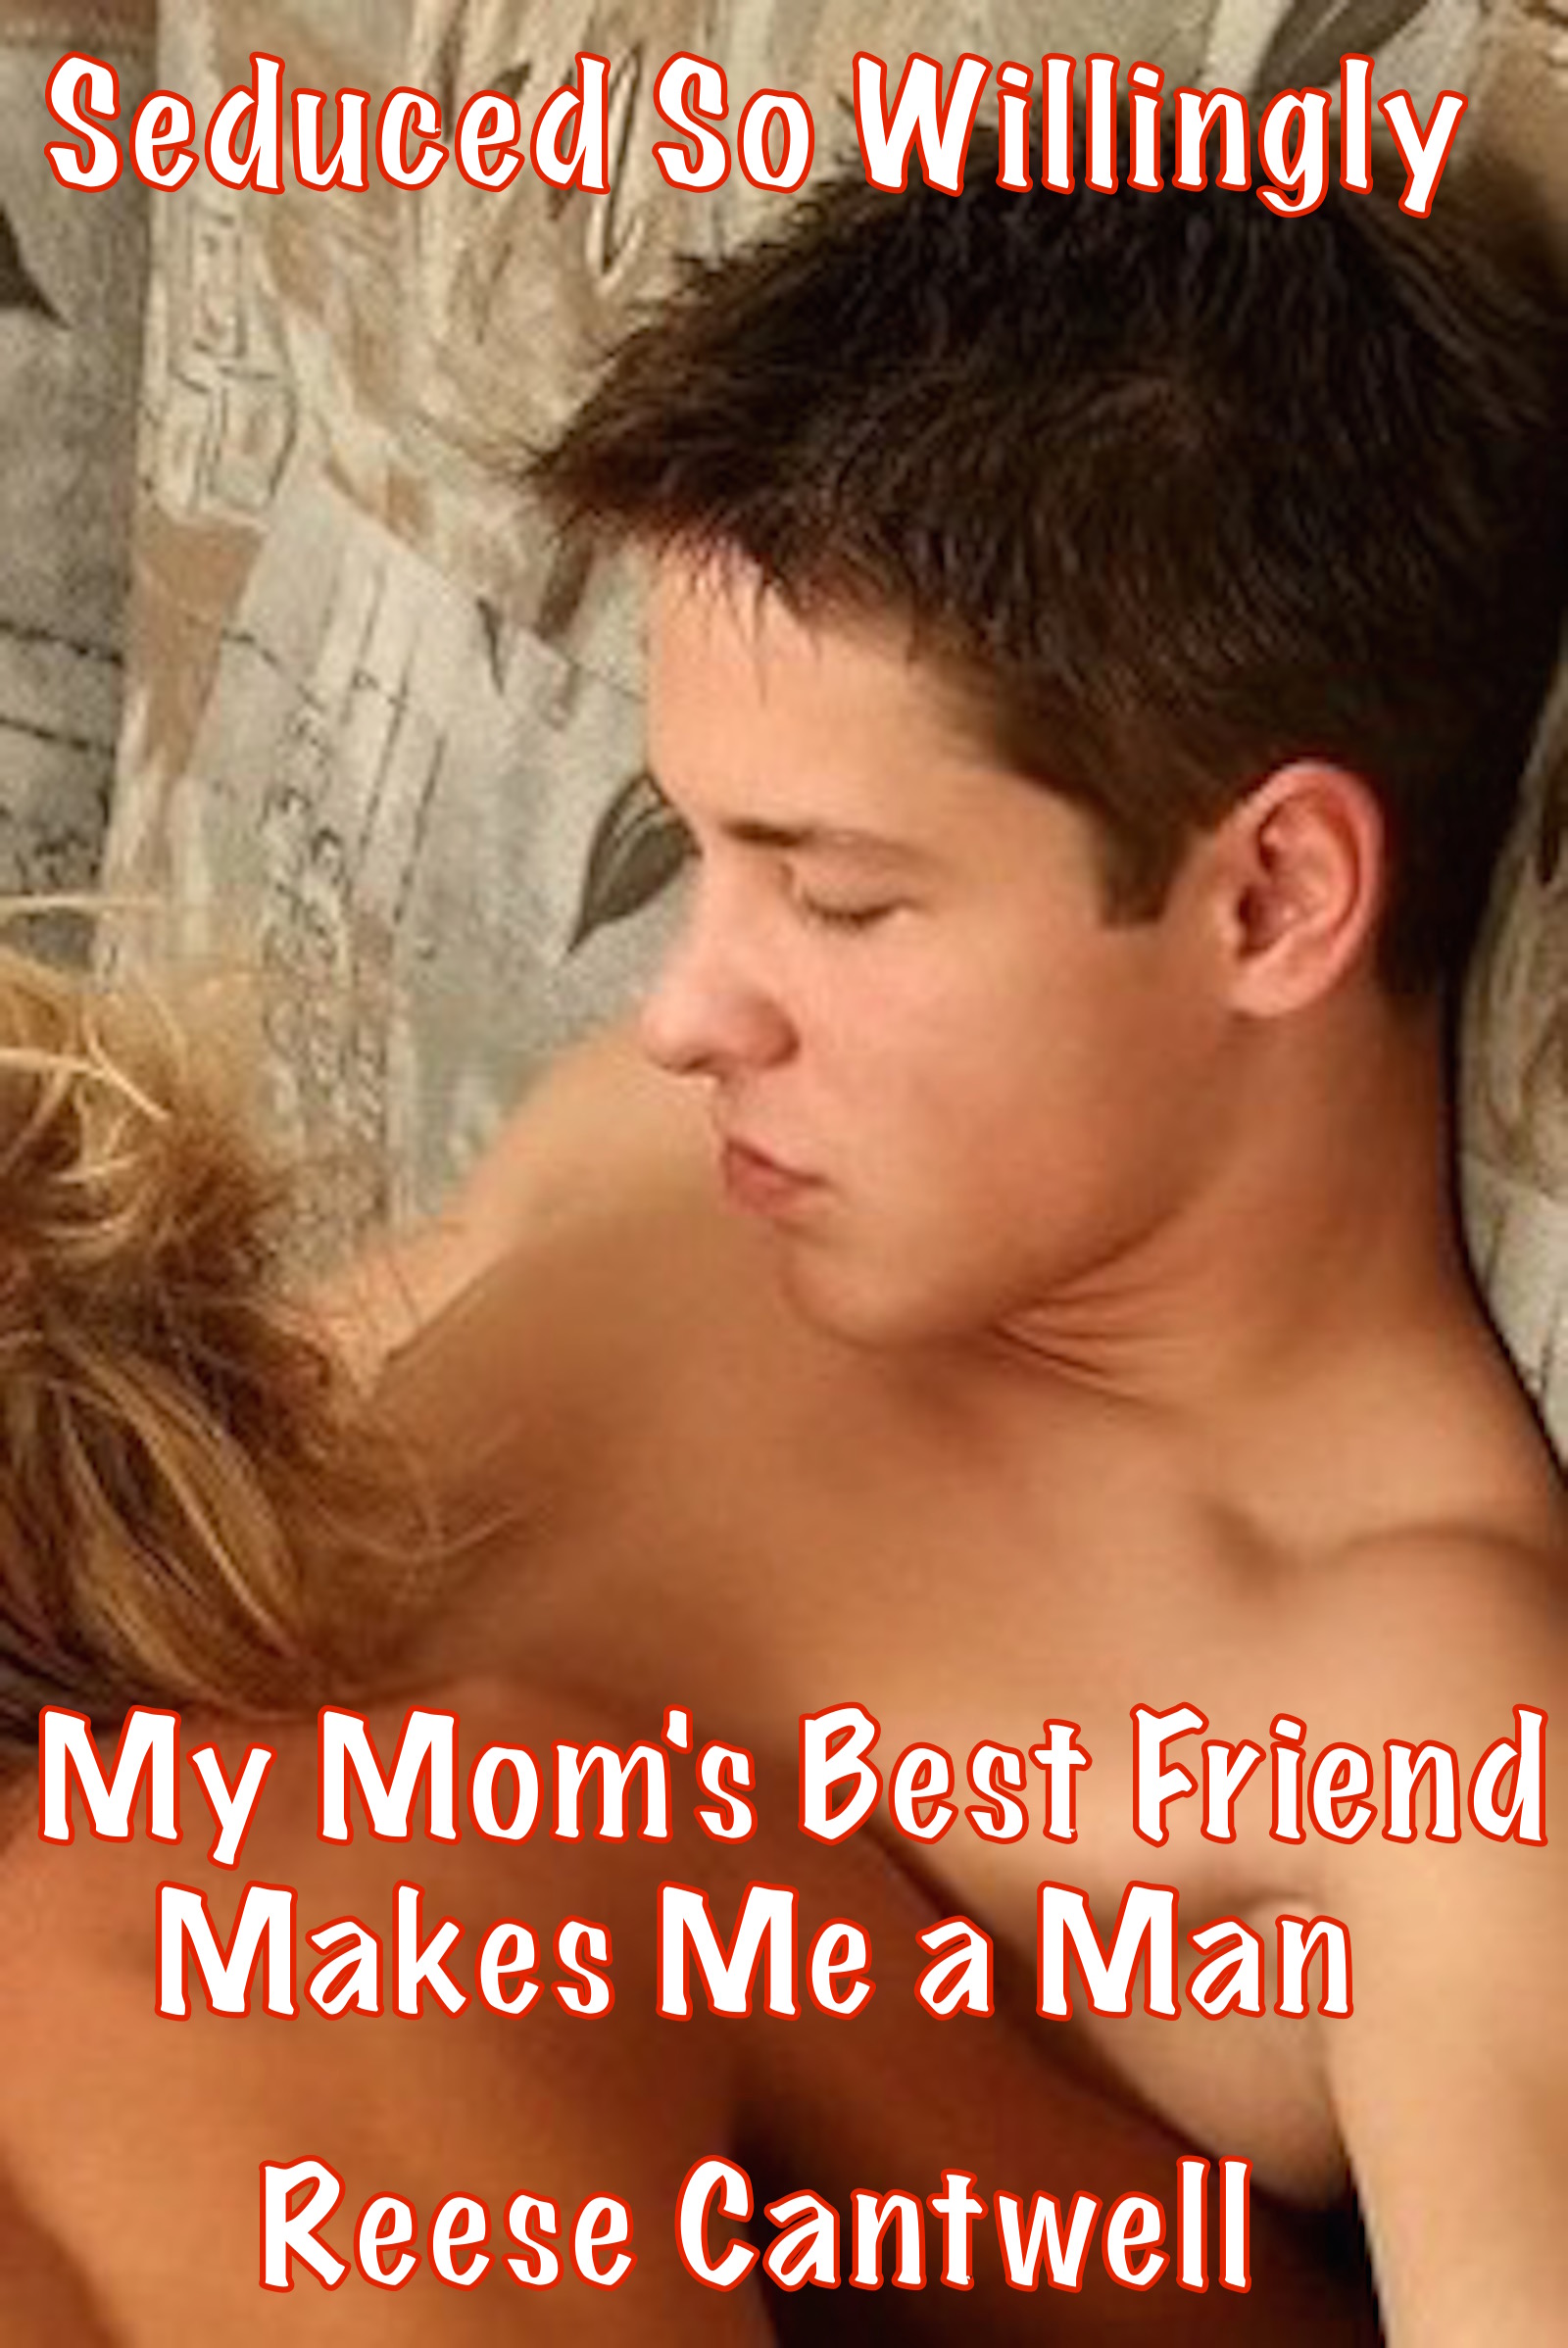 christine attieh recommends seduced by best friends mom pic